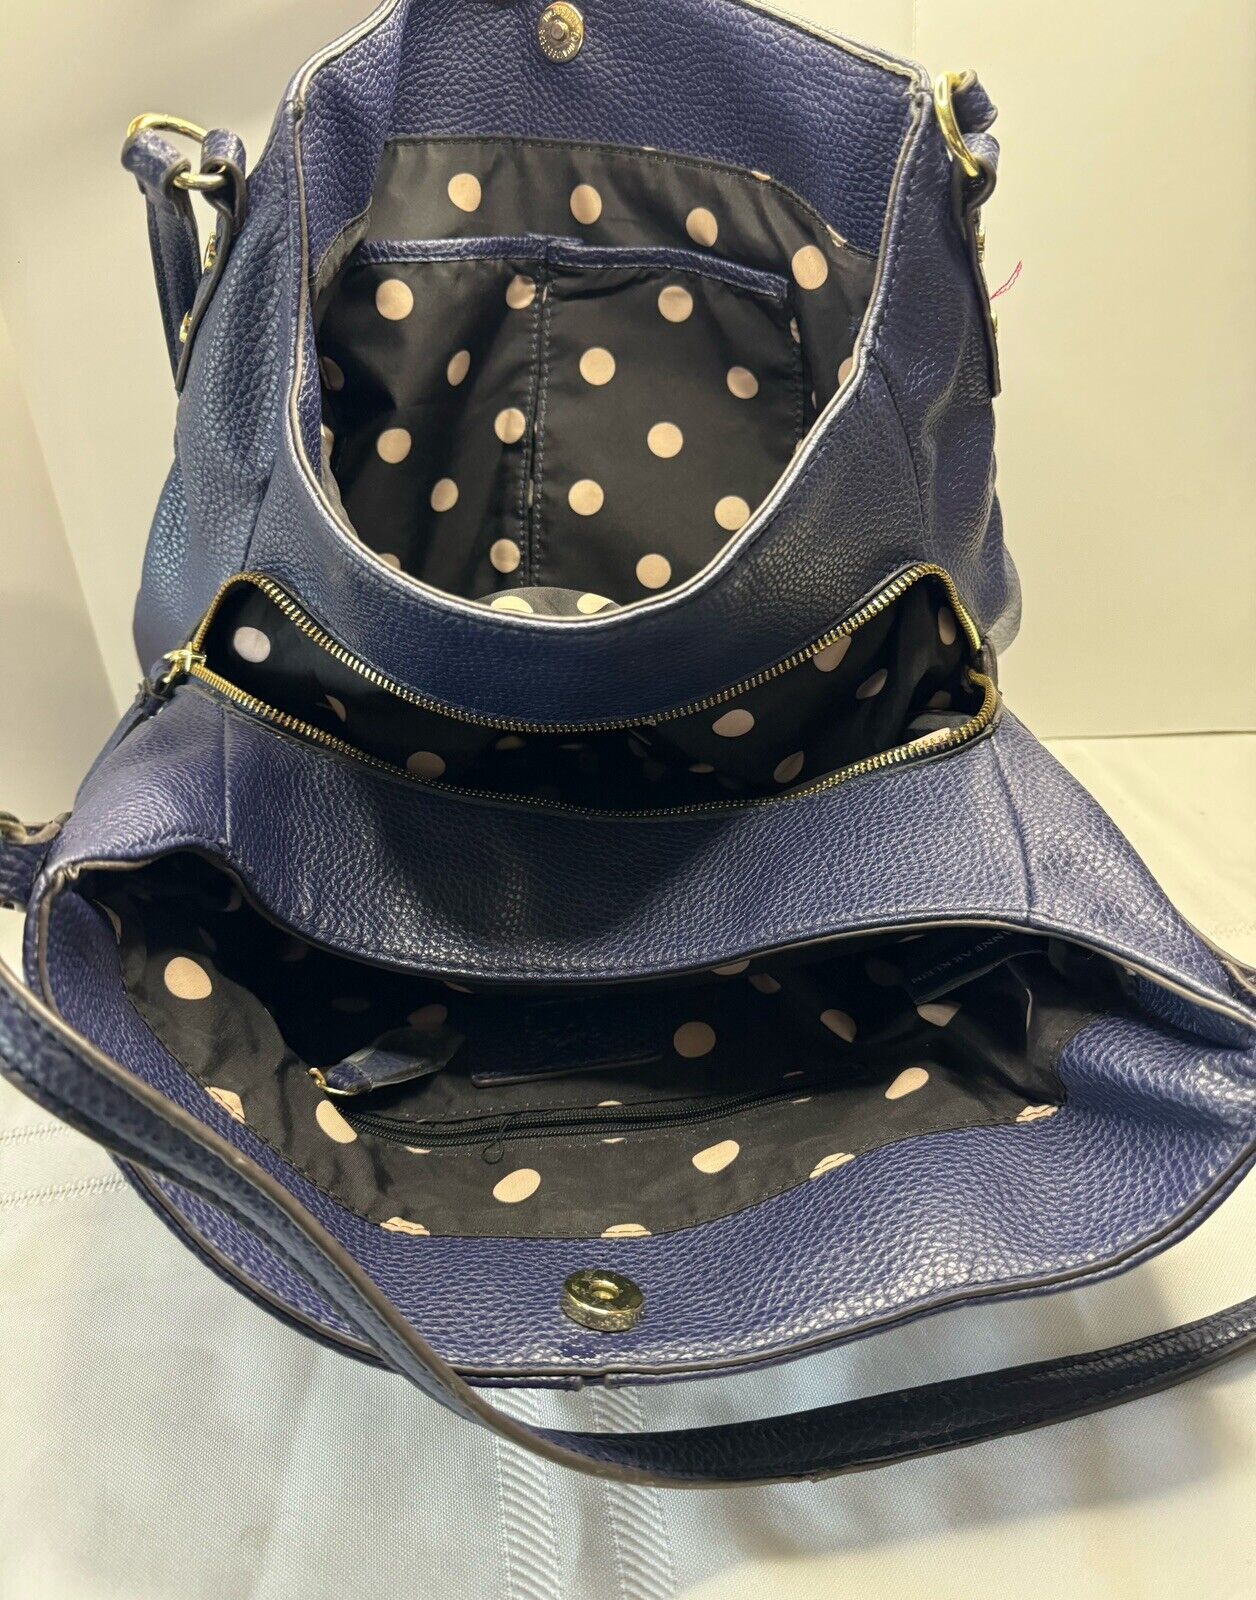 Anne Klein Navy Blue Faux Leather Tote Bag Purse - image 3